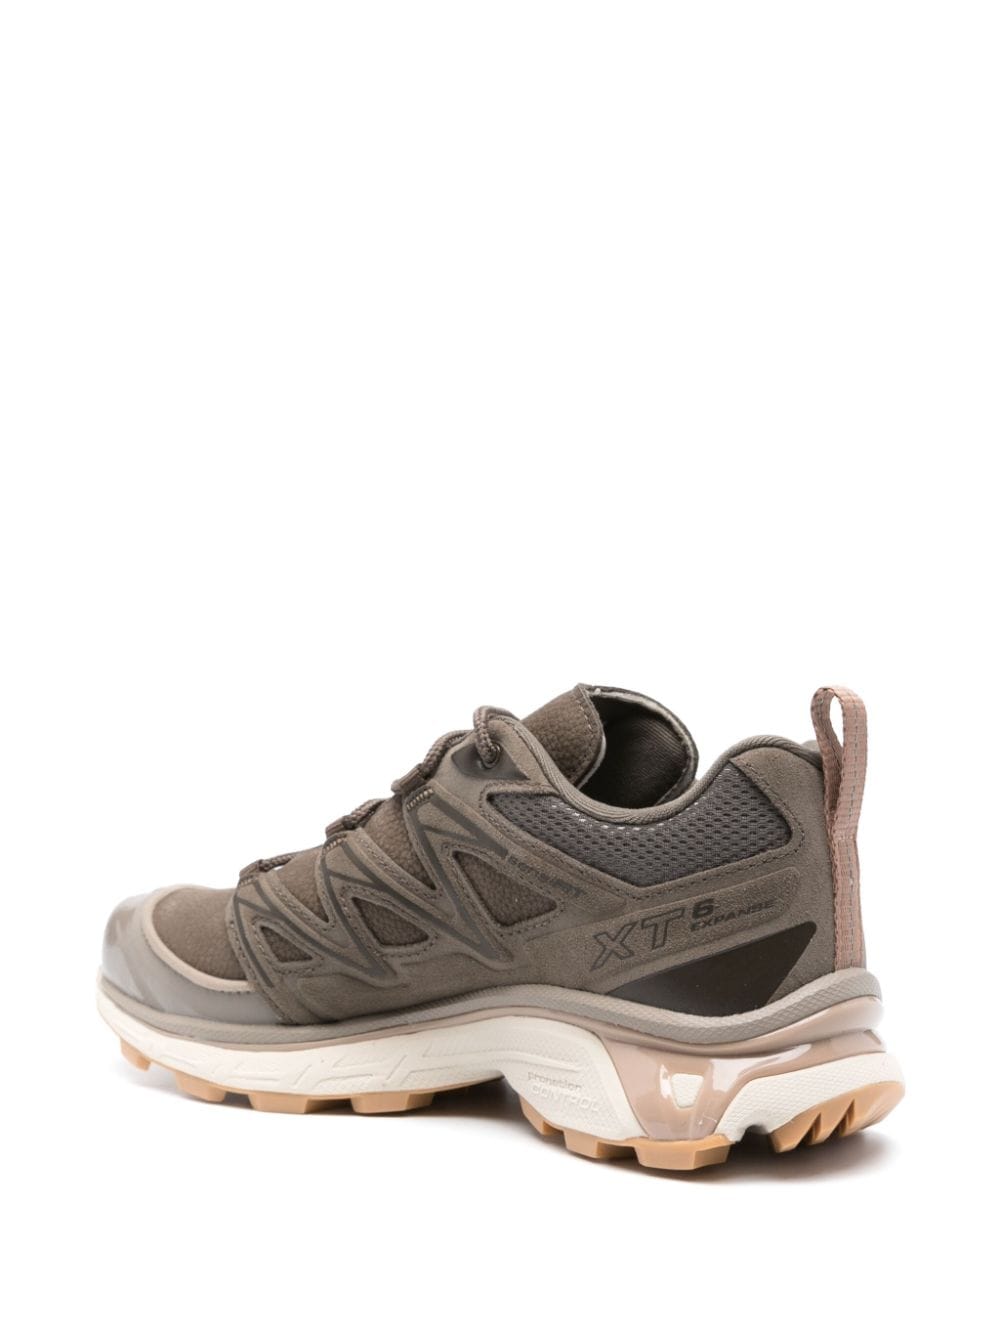 XT-6 Expanse leather sneakers<BR/><BR/><BR/>